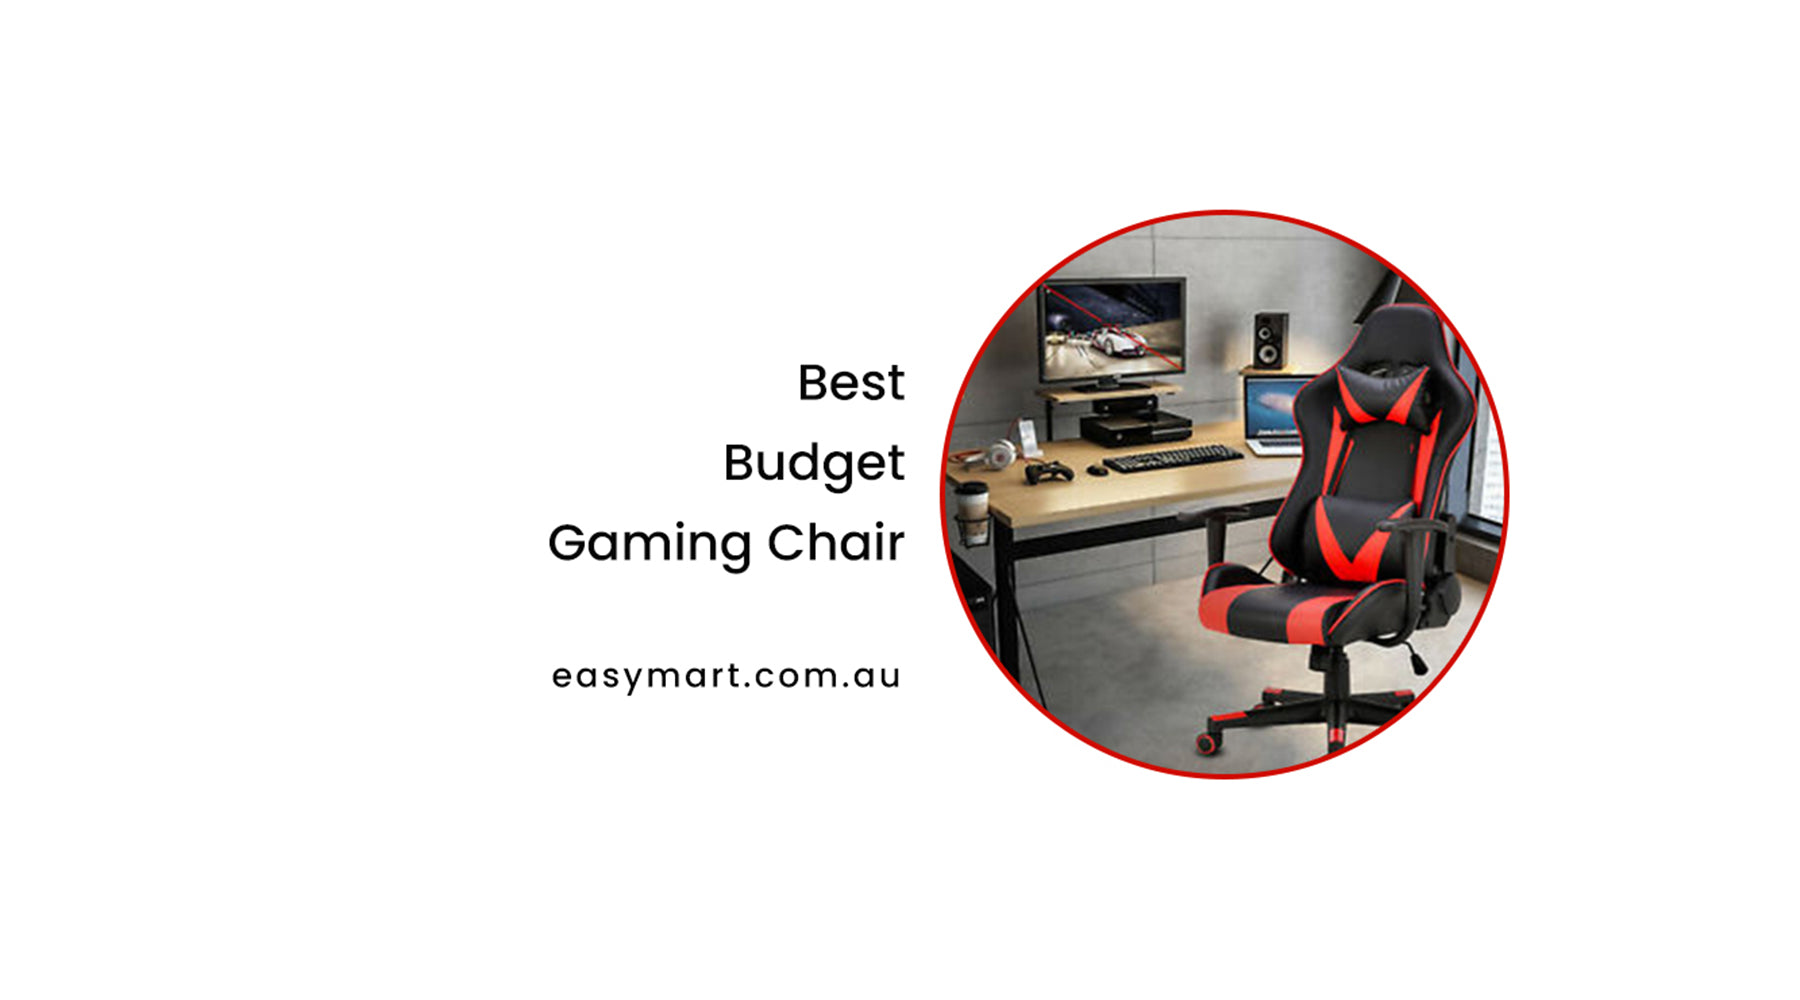 Best Budget Gaming Chair | An Instant Skill Booster